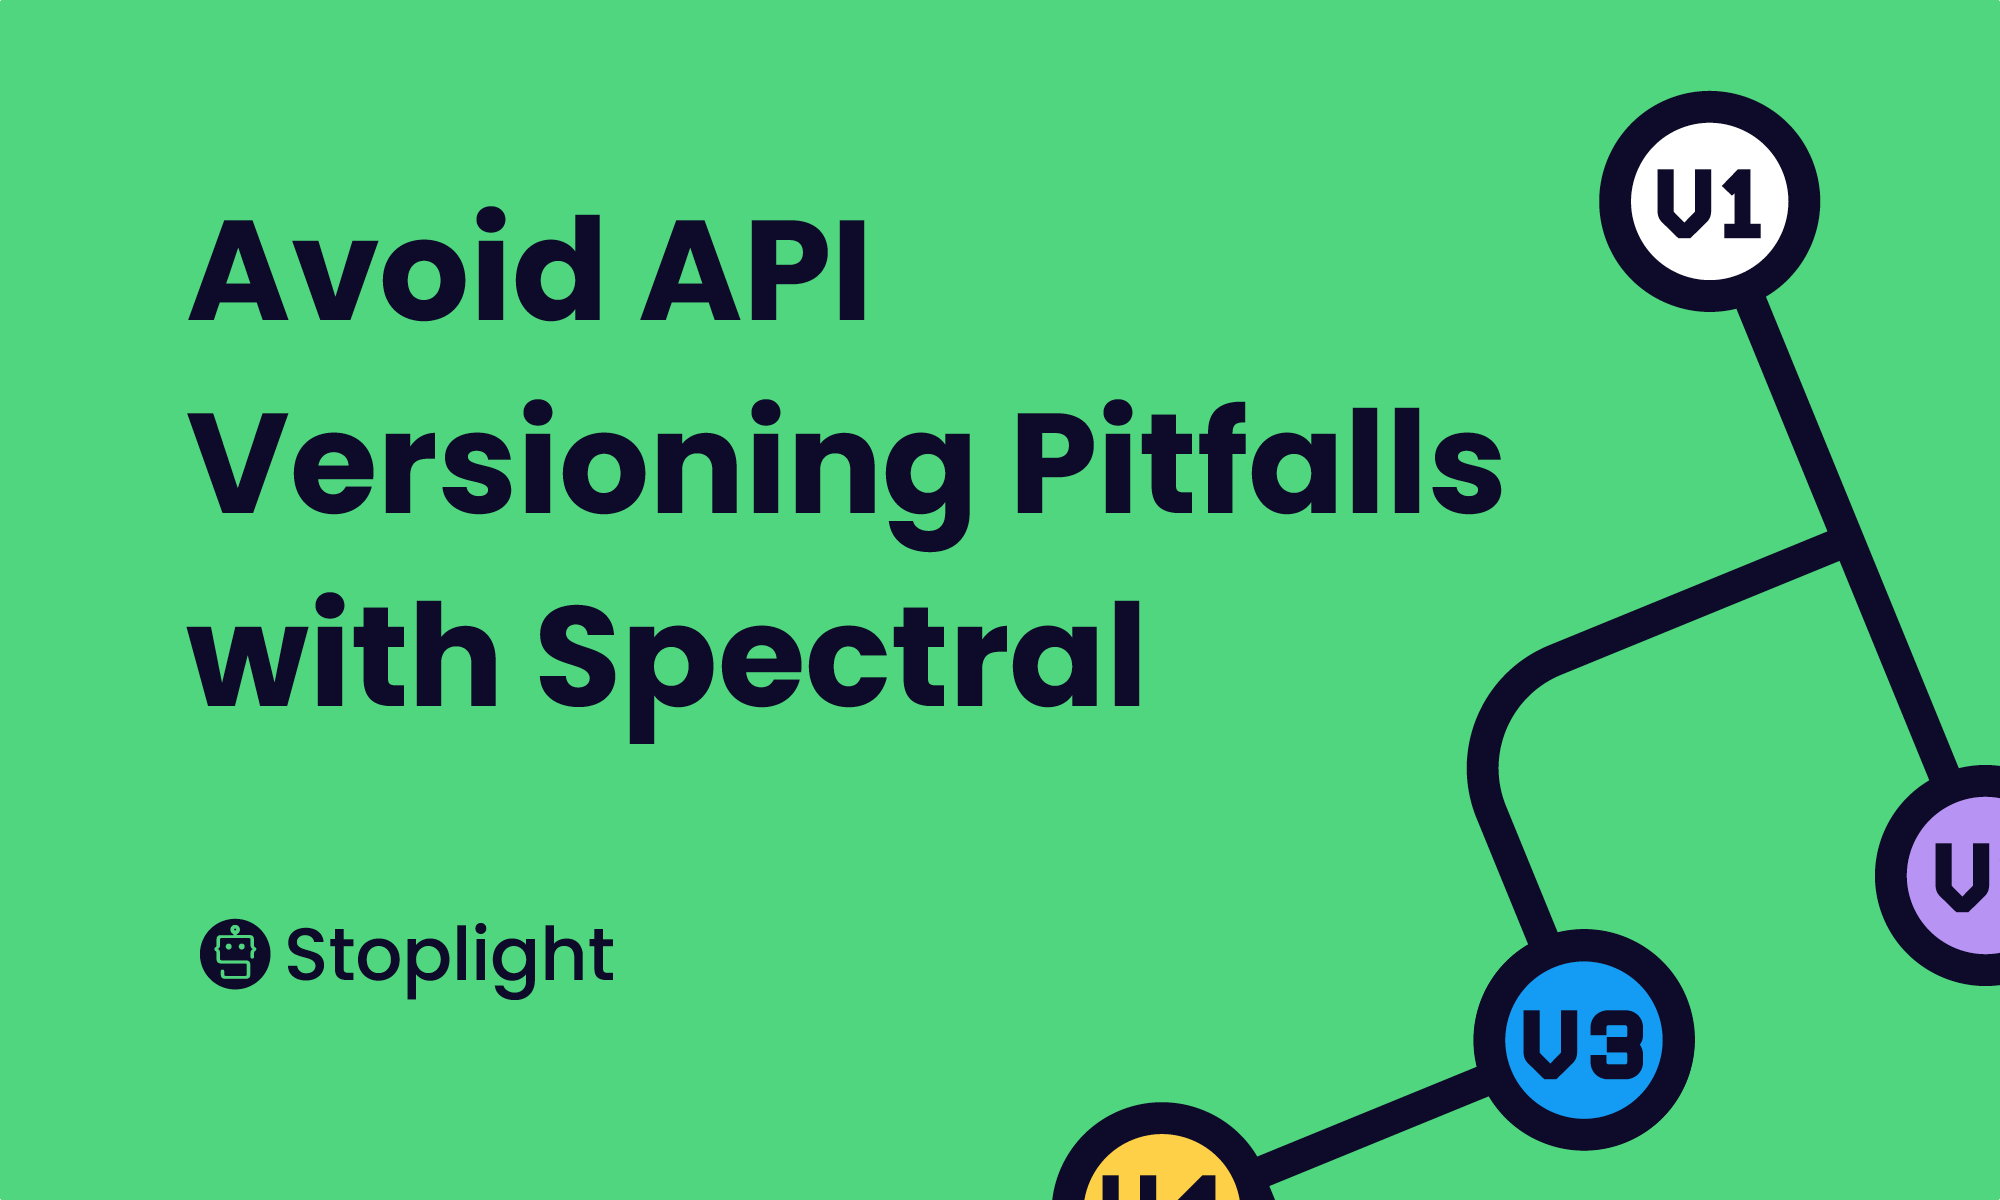 Avoid API Versioning Pitfalls with Spectral